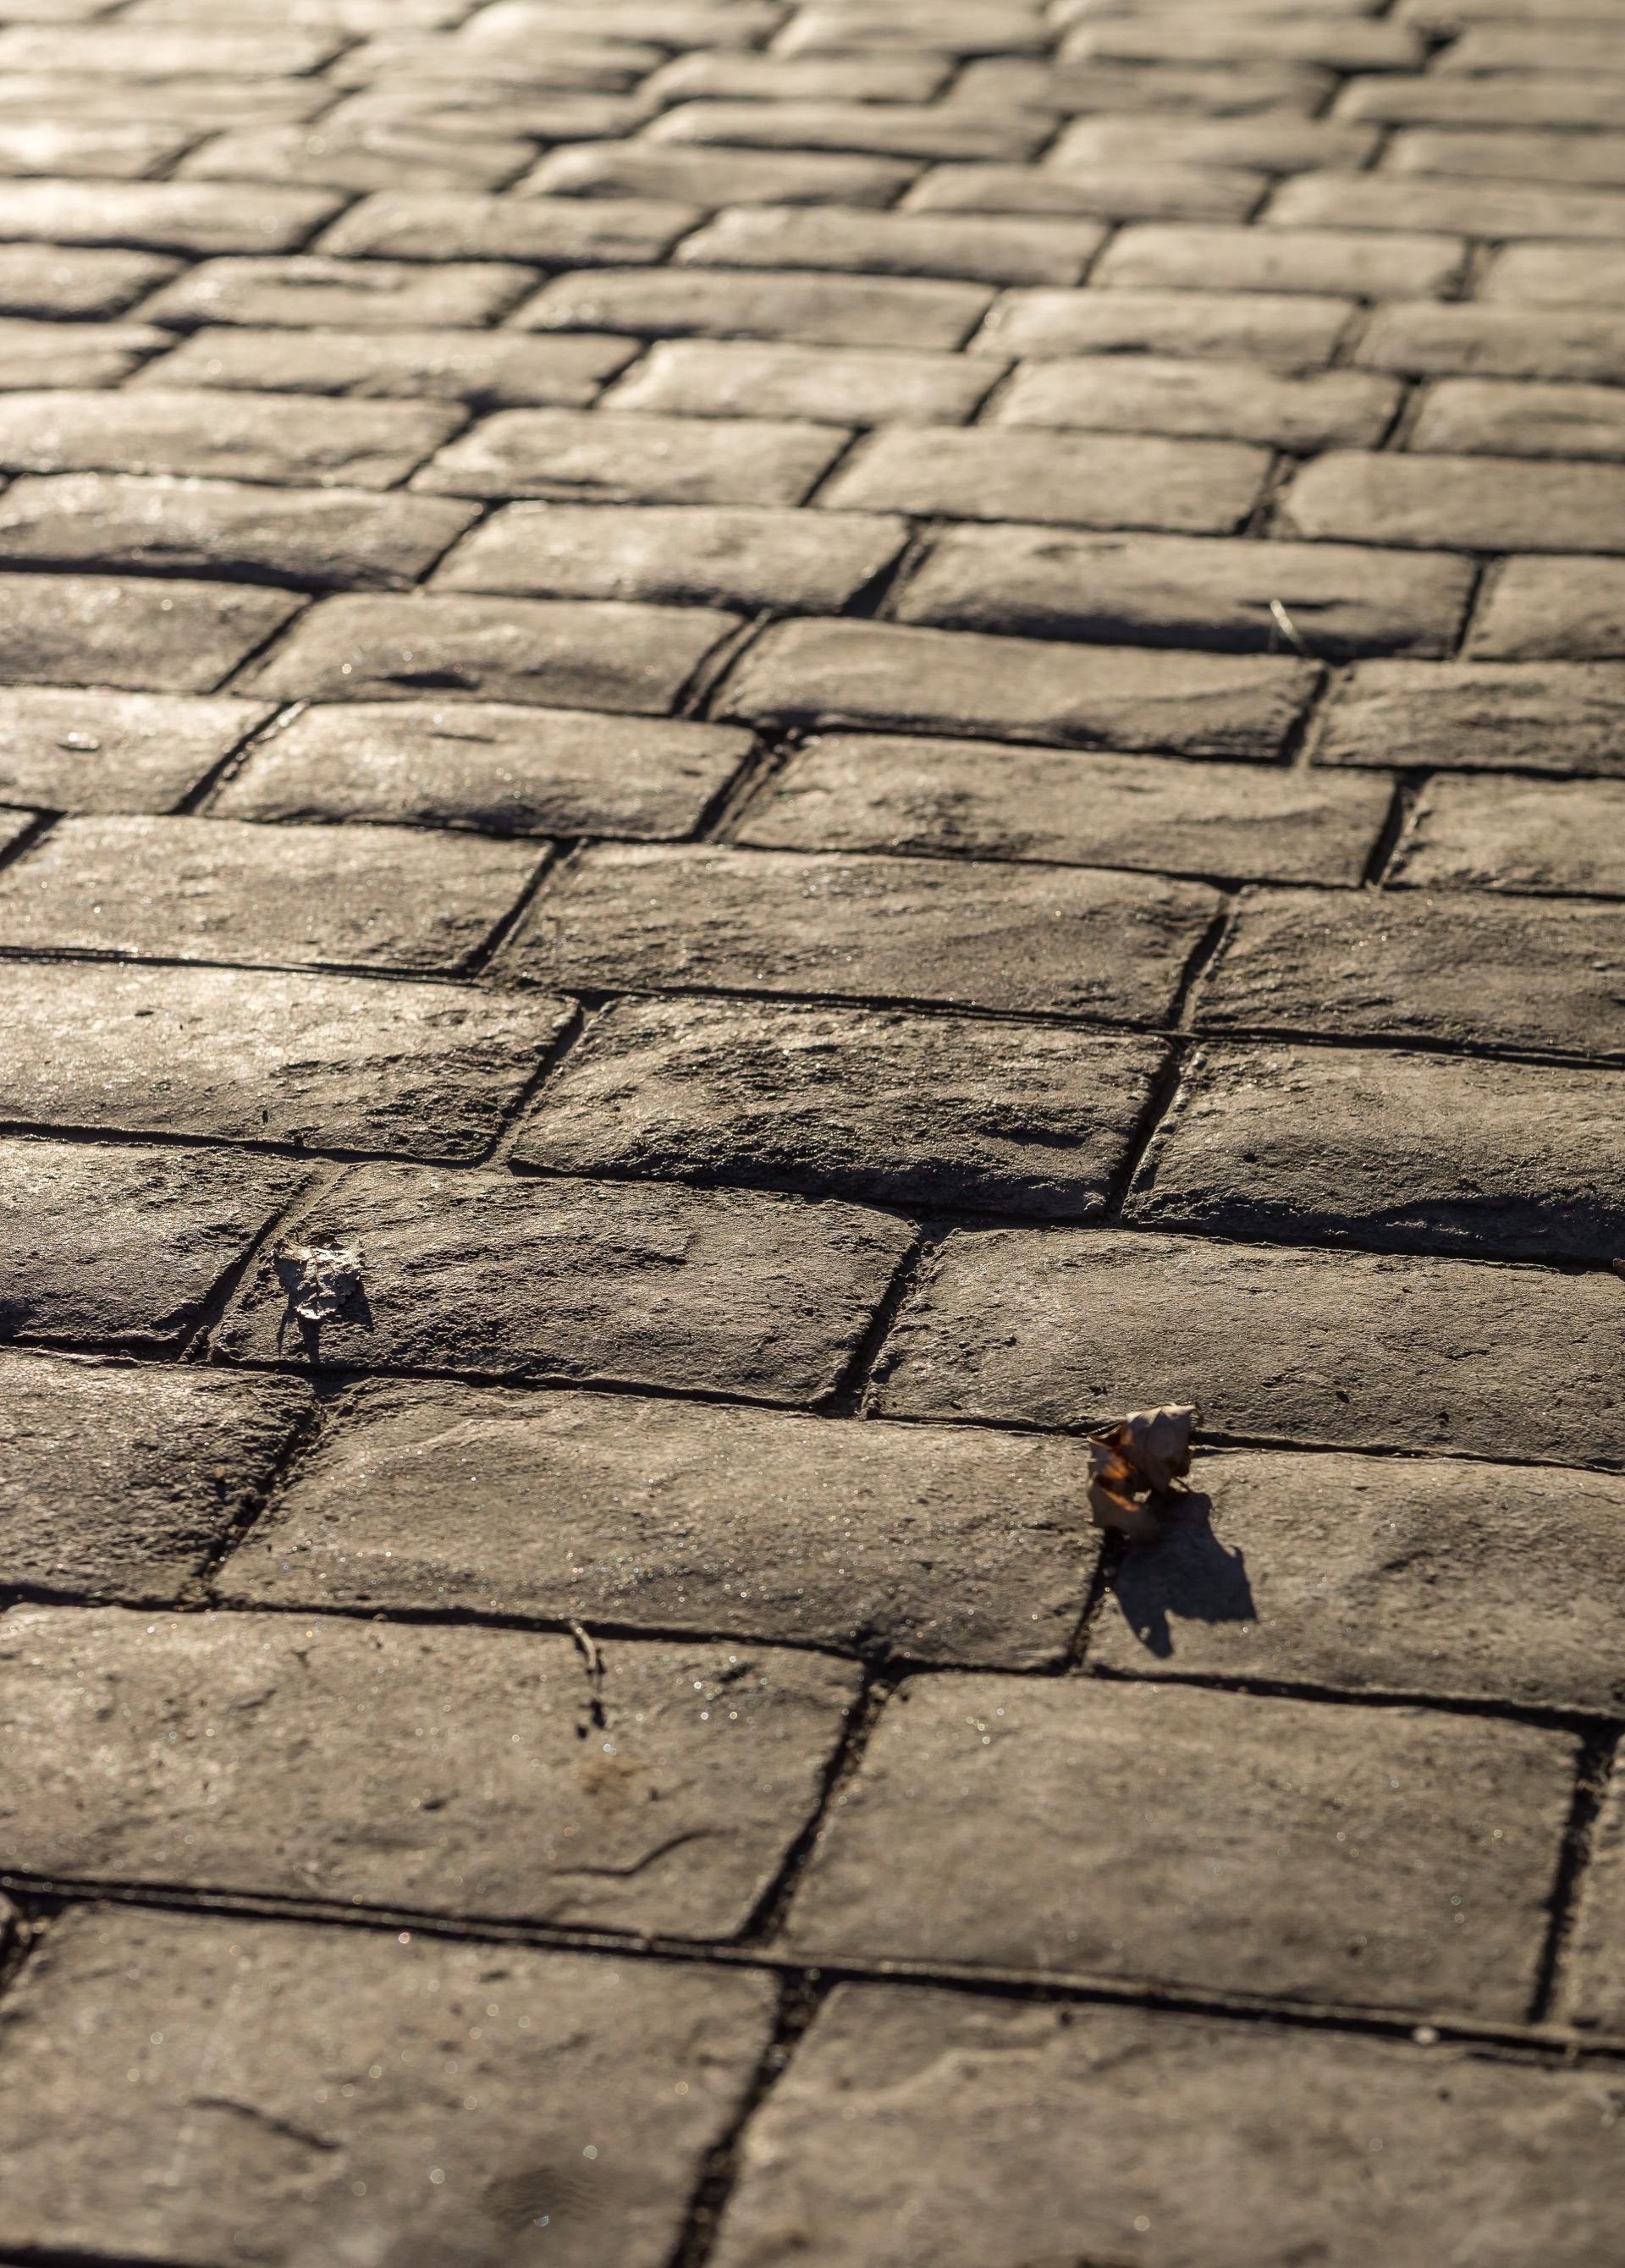 A close up of a brick pavement with a leaf on it